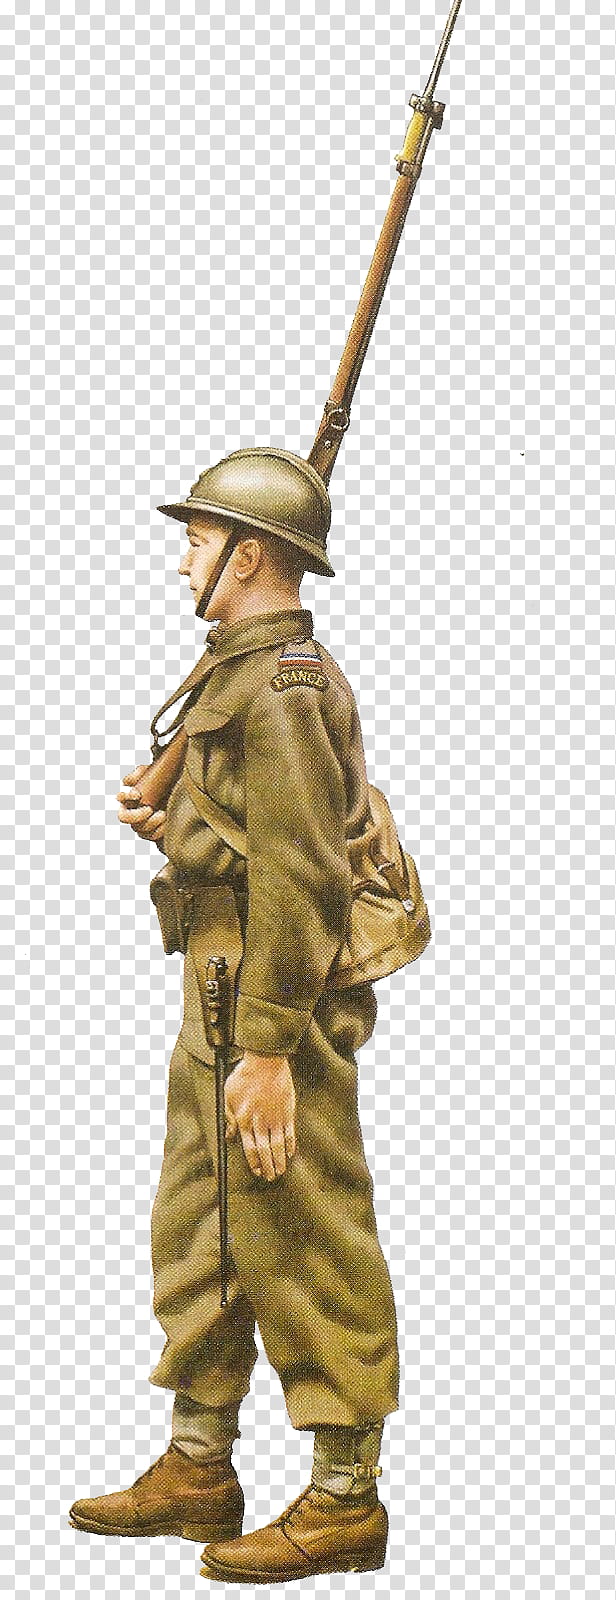 Soldier, World War Ii, France, Battle Of France, Military, Infantry, Uniform, Free French Forces transparent background PNG clipart